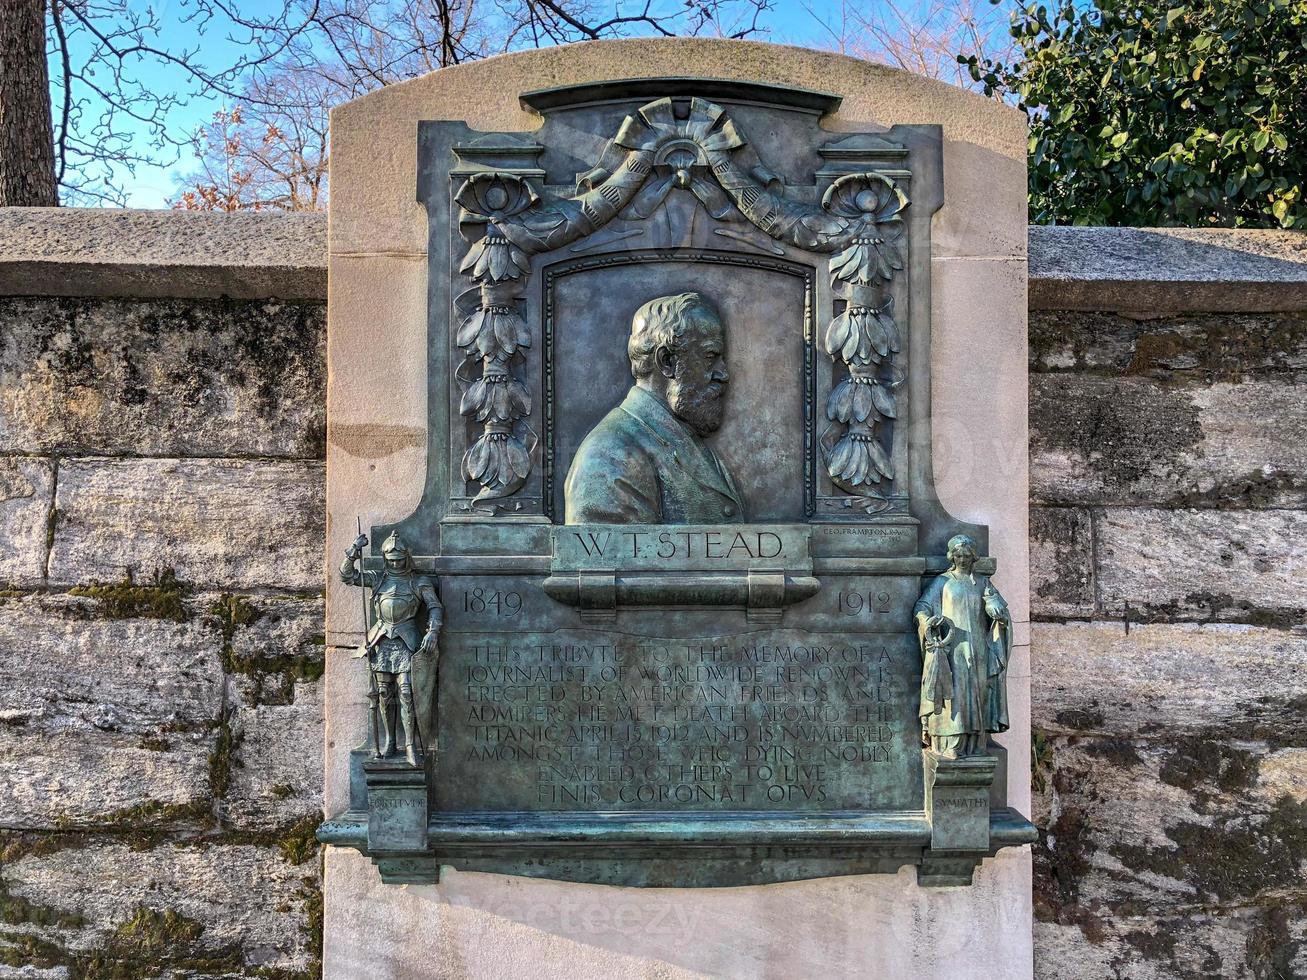 Bronze bas-relief remembers British journalist William T. Stead, who perished along with over 1,500 others when the RMS Titanic sank on April 15, 1912. Located on 91st St, Central Park, New York City. photo